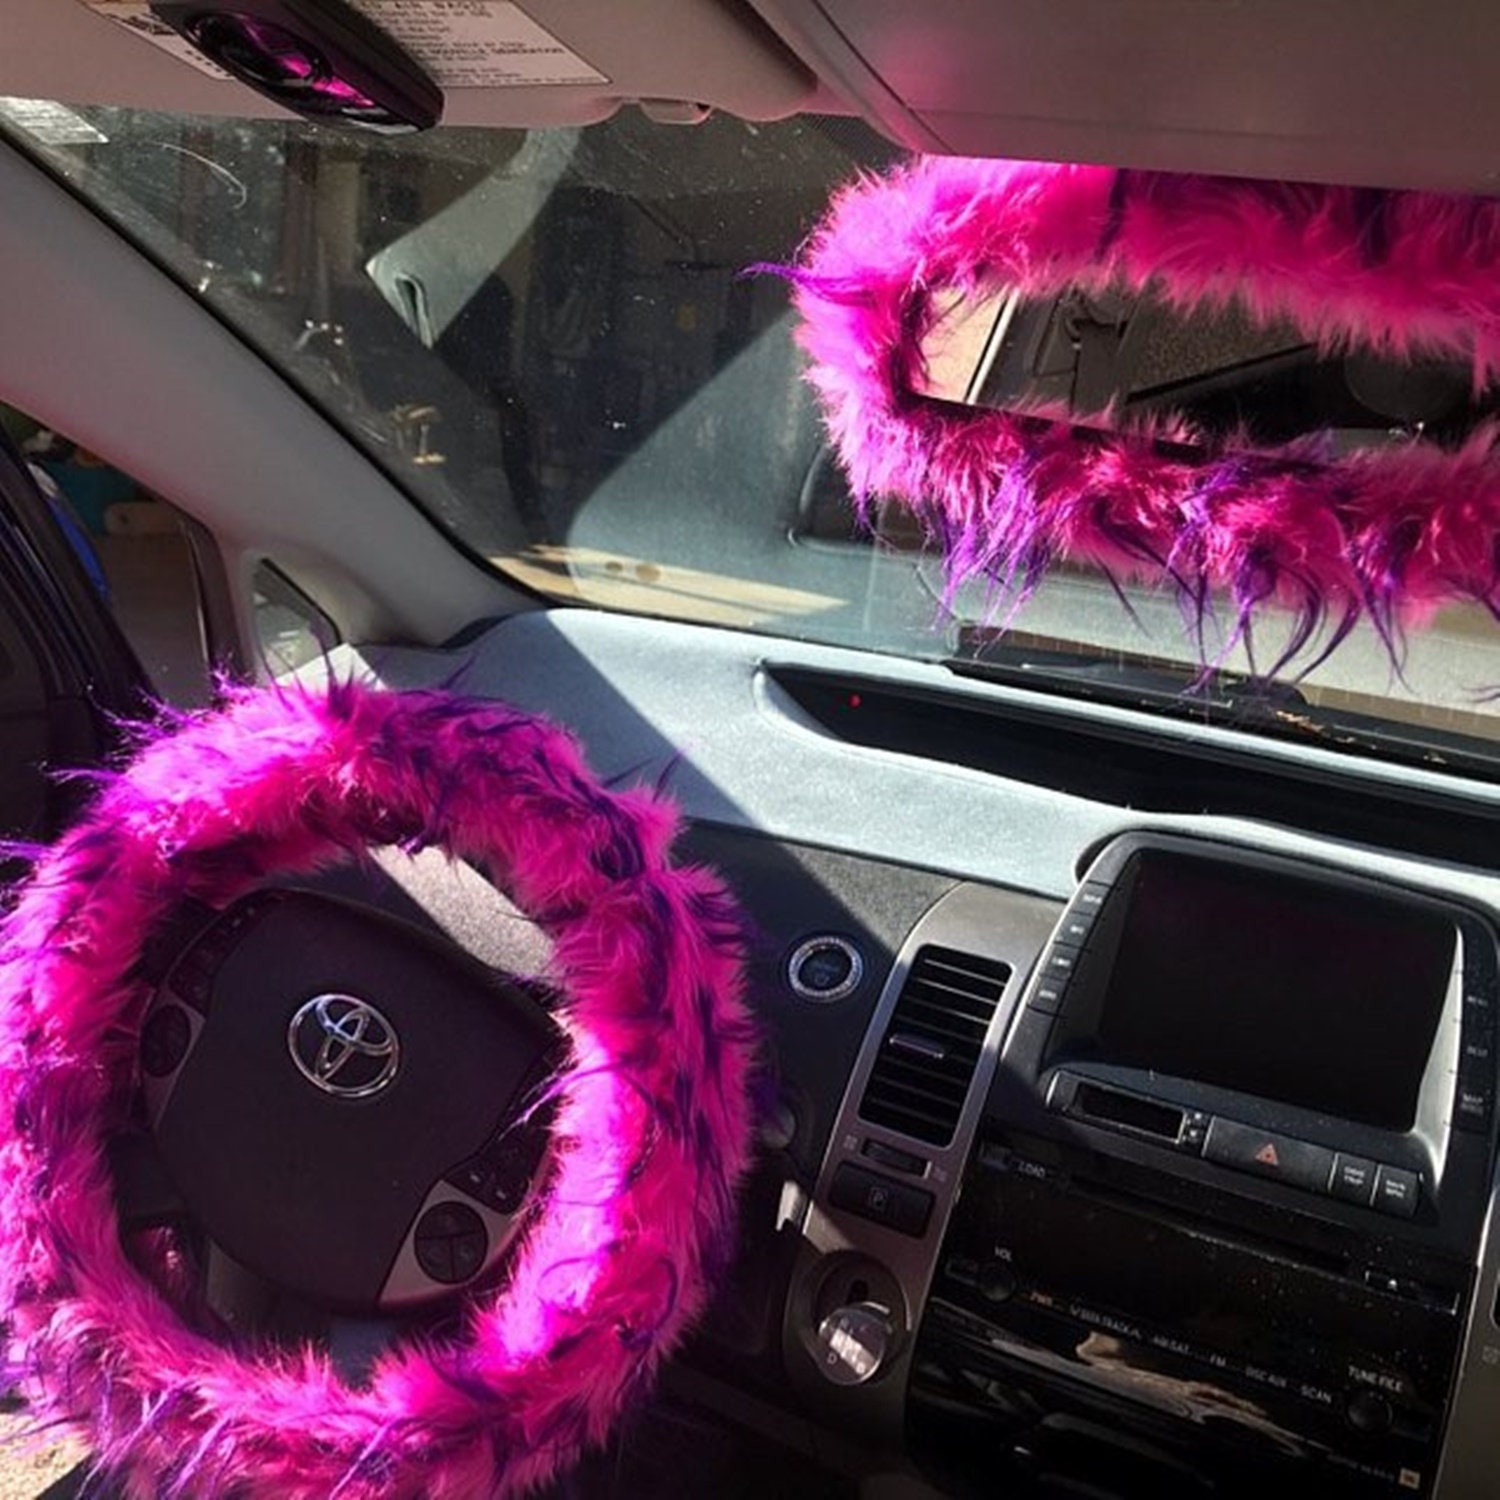 Buy Fuzzy Car Accessories, Steering Wheel Cover, Gear Shift Knob Cover,  Handbrake Cover, Rear View Mirror Cover, Belt Cover. Accessories Set.  Online in India 